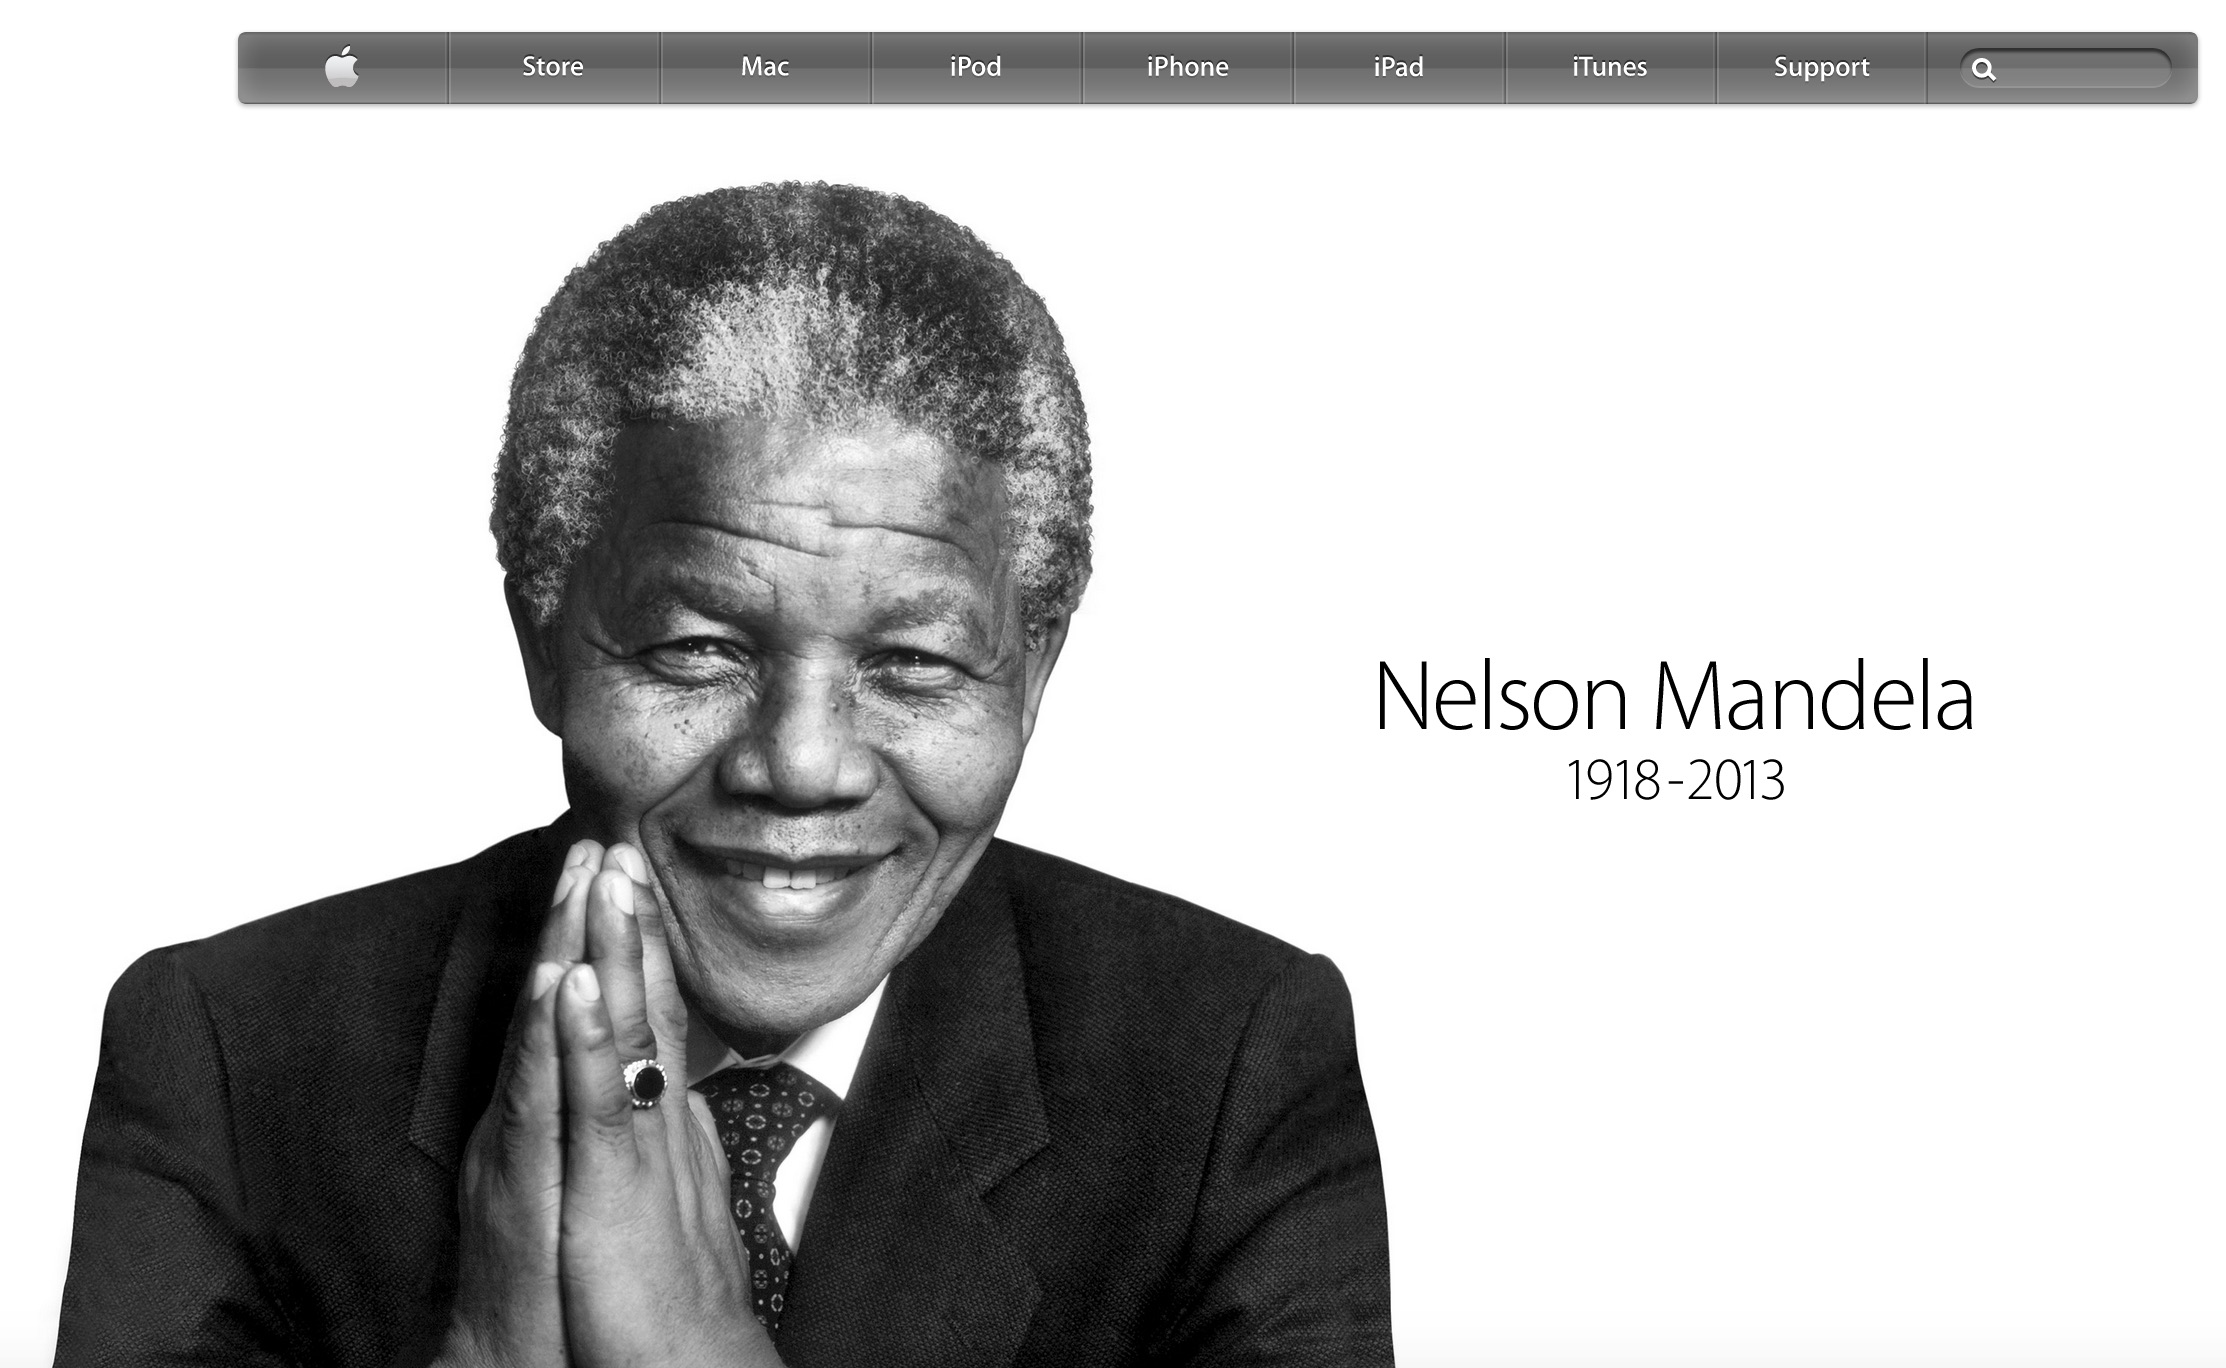 Homepage after the death of Nelson Mandela (2013)